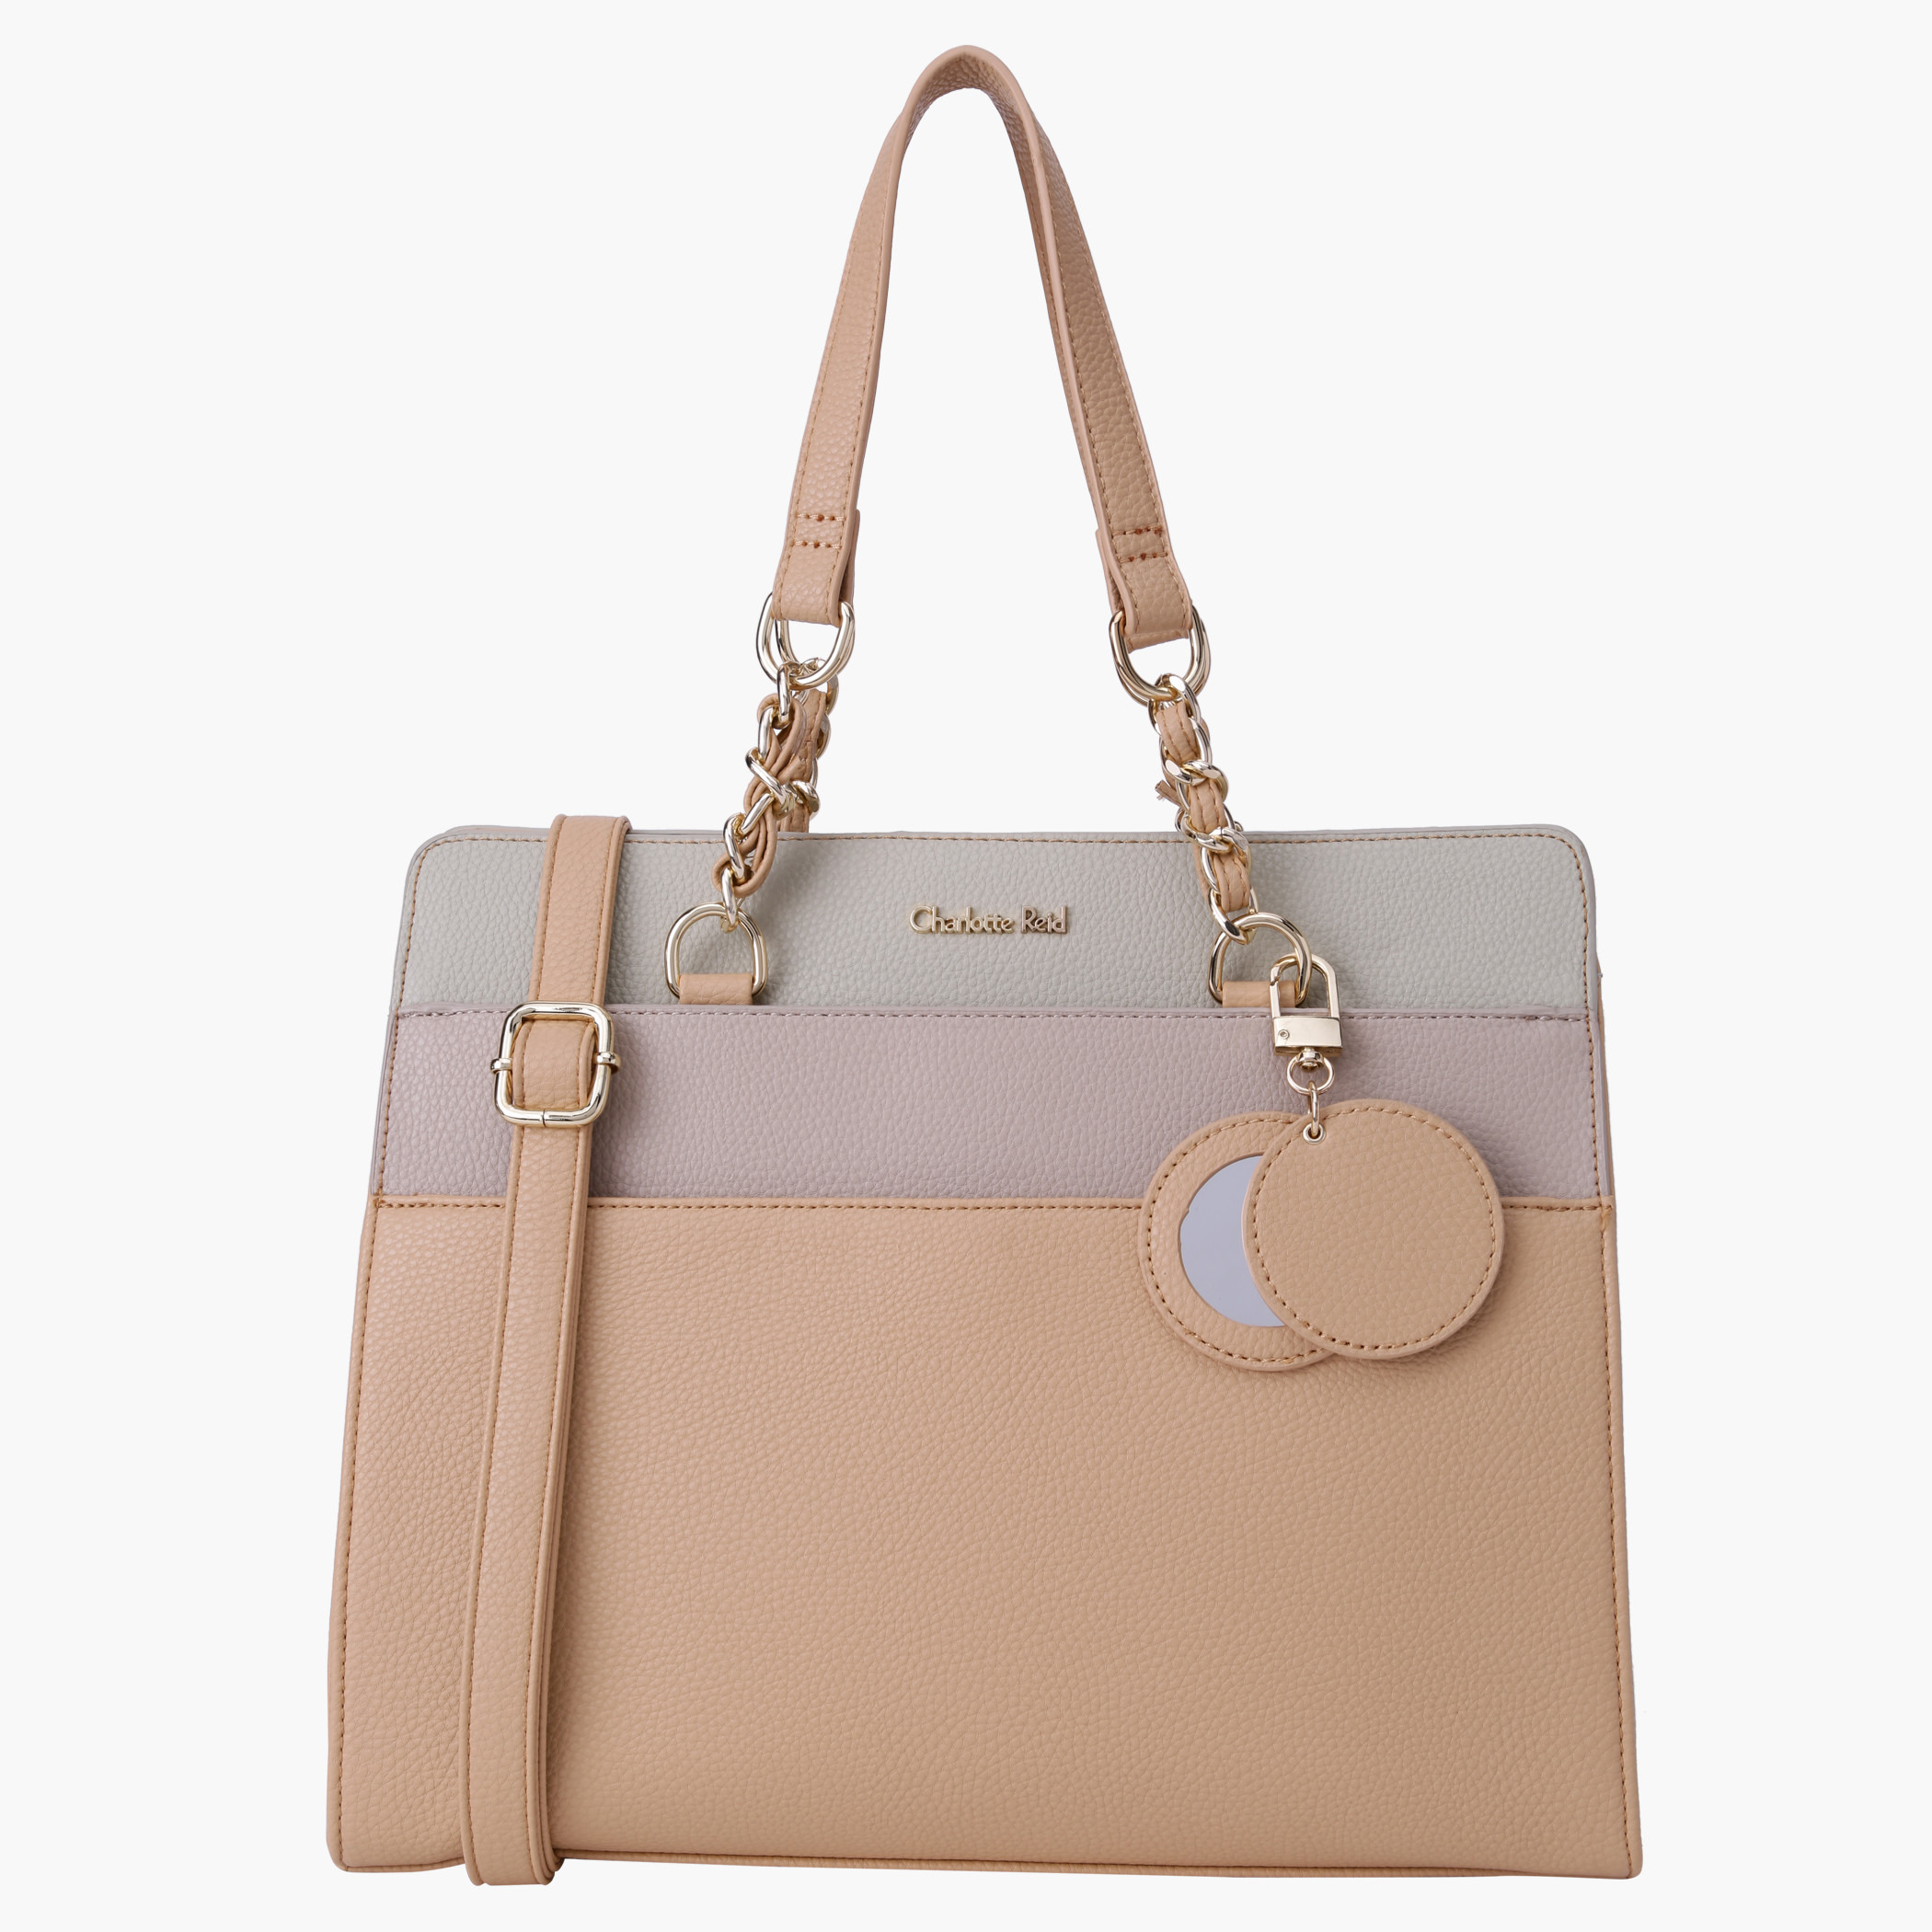 Charlotte Bag Tan Leather - Bags from Moda in Pelle UK